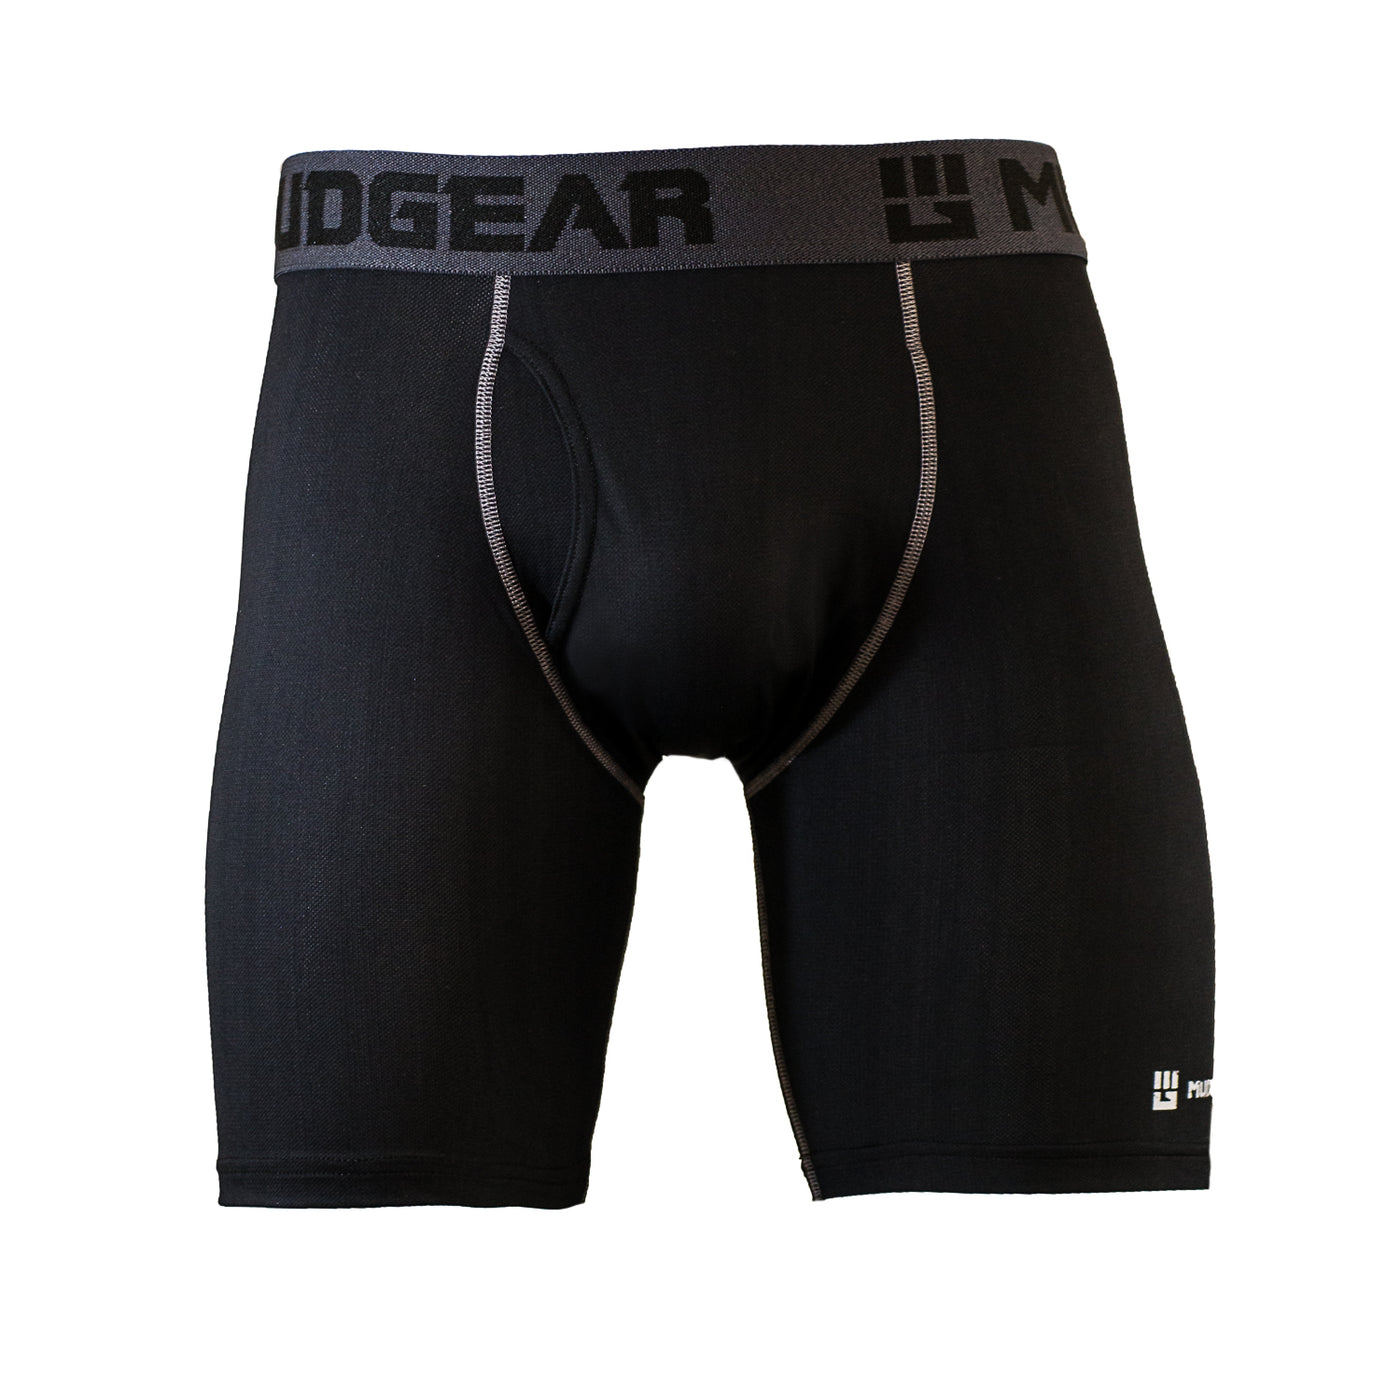 Men's Base Layer Boxer Brief [Discontinued - Final Clearance]